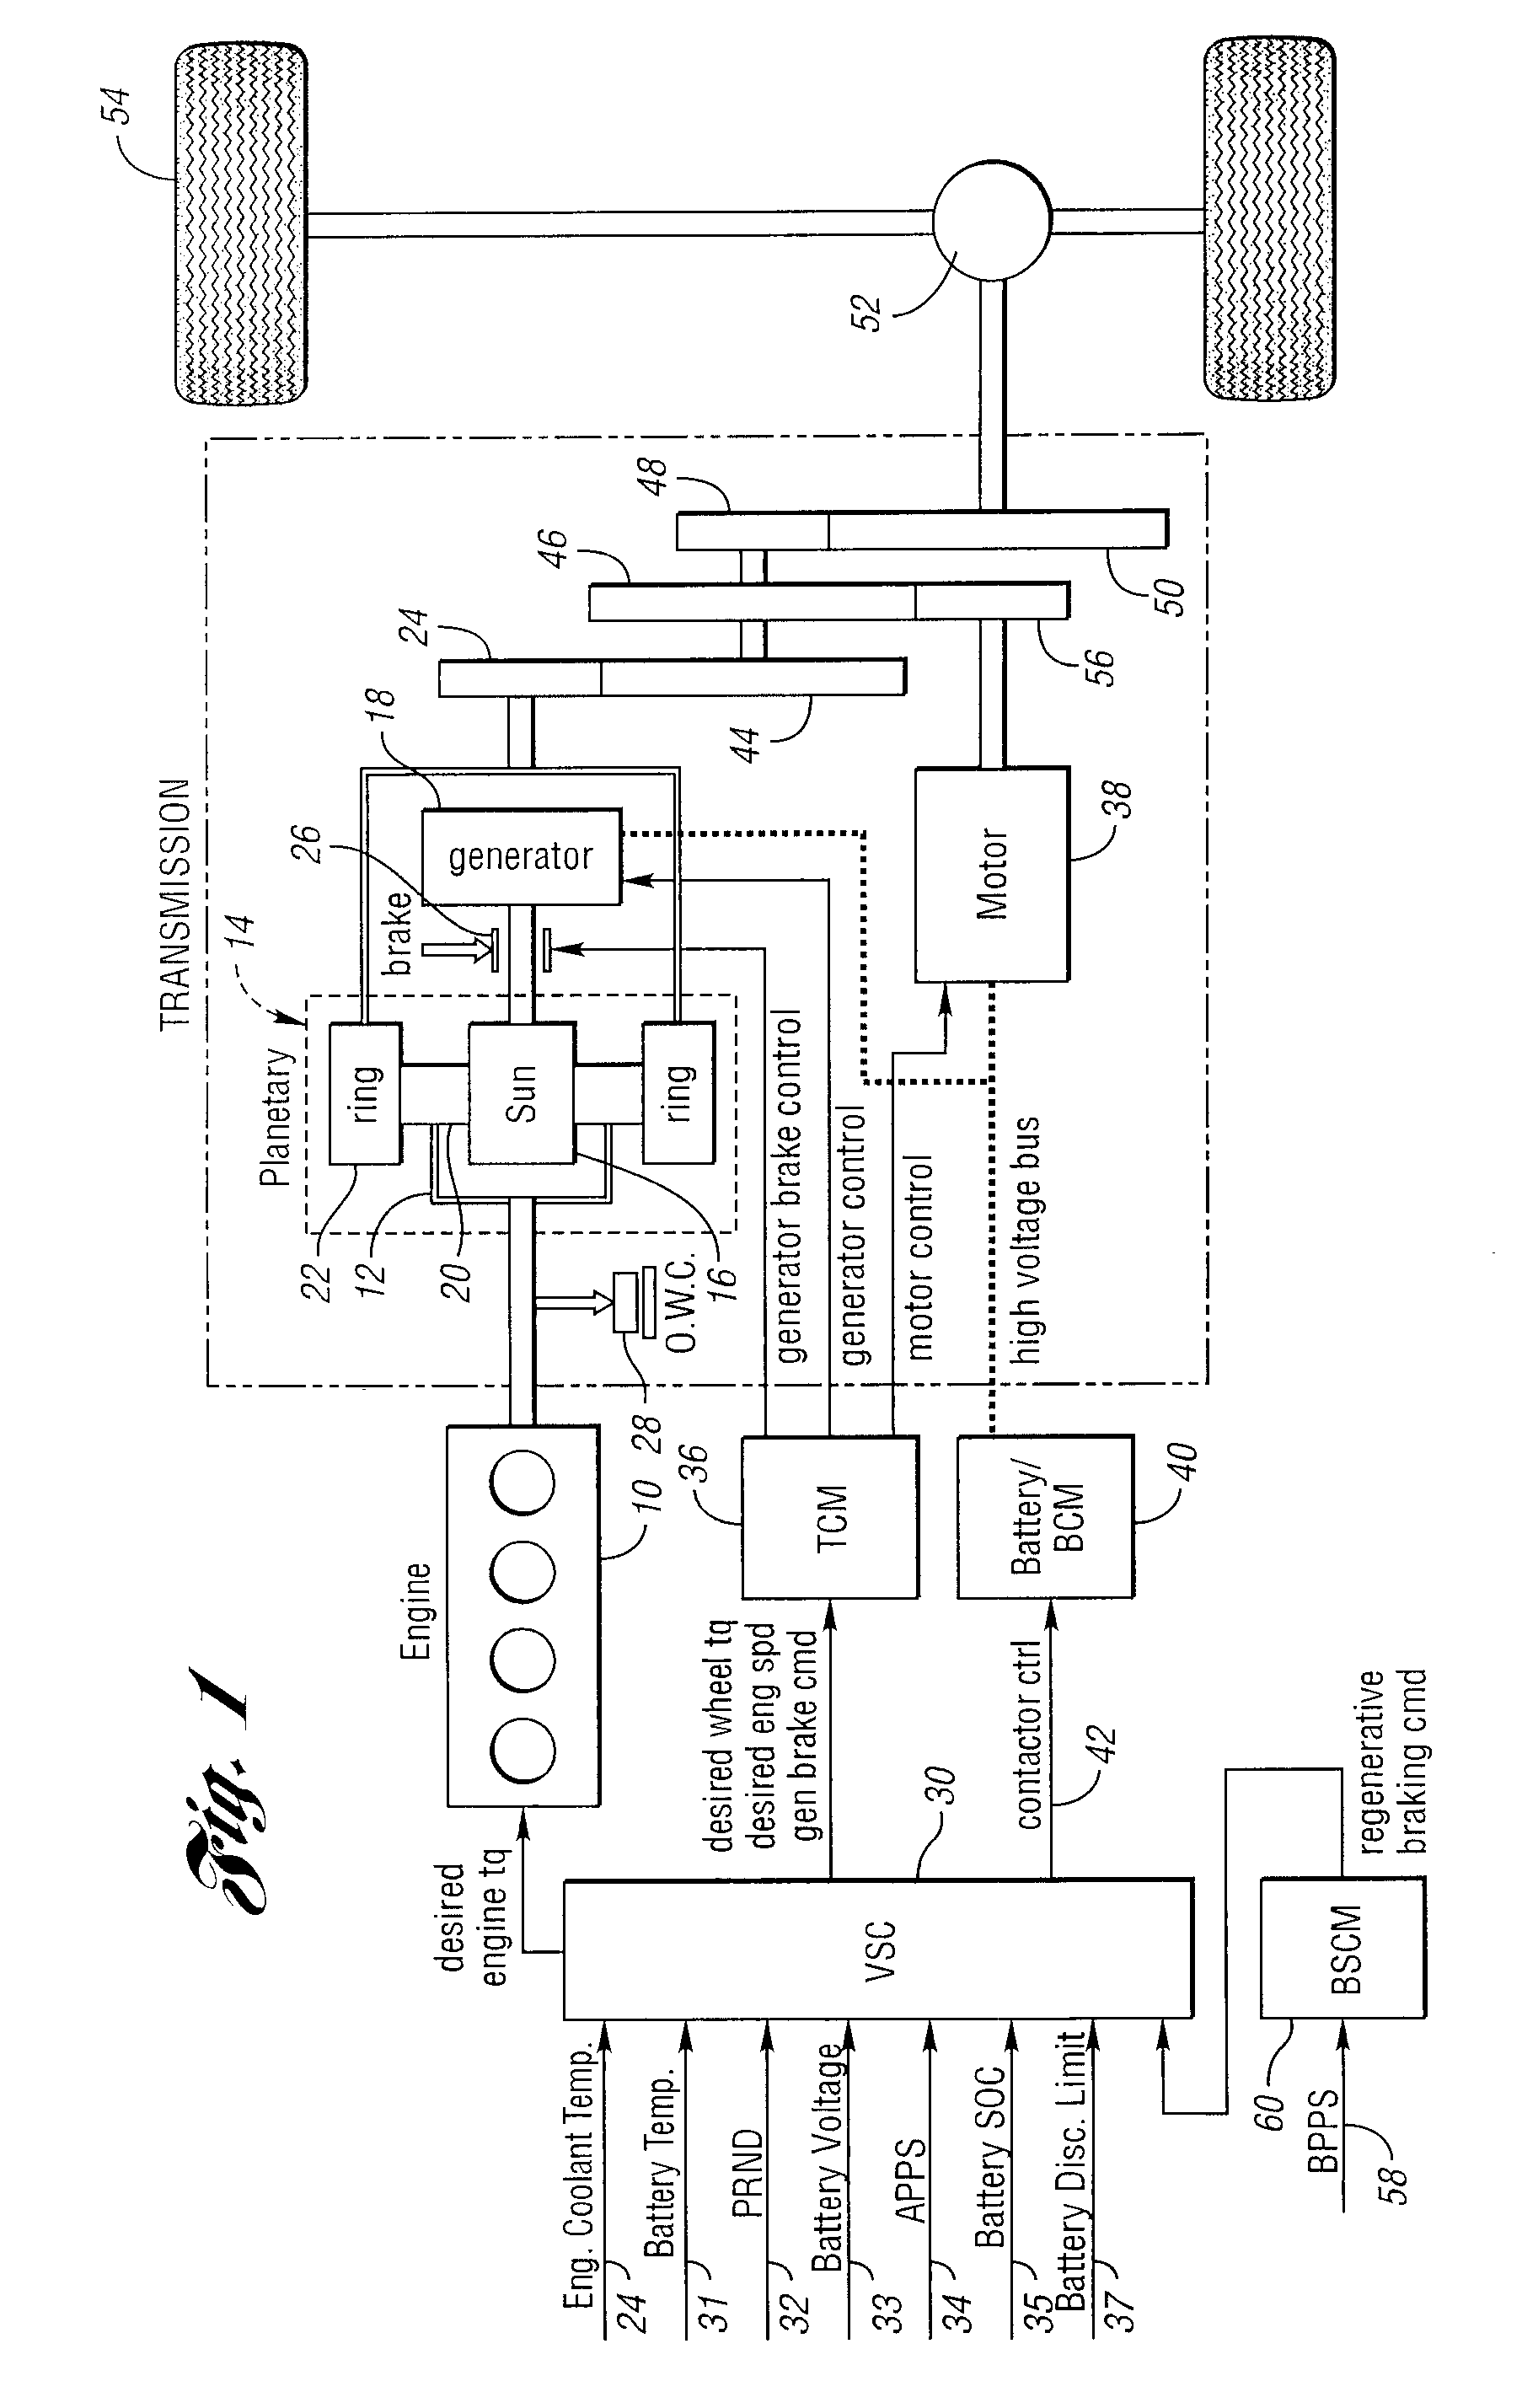 Method for controlling starting of an engine in a hybrid electric vehicle powertrain